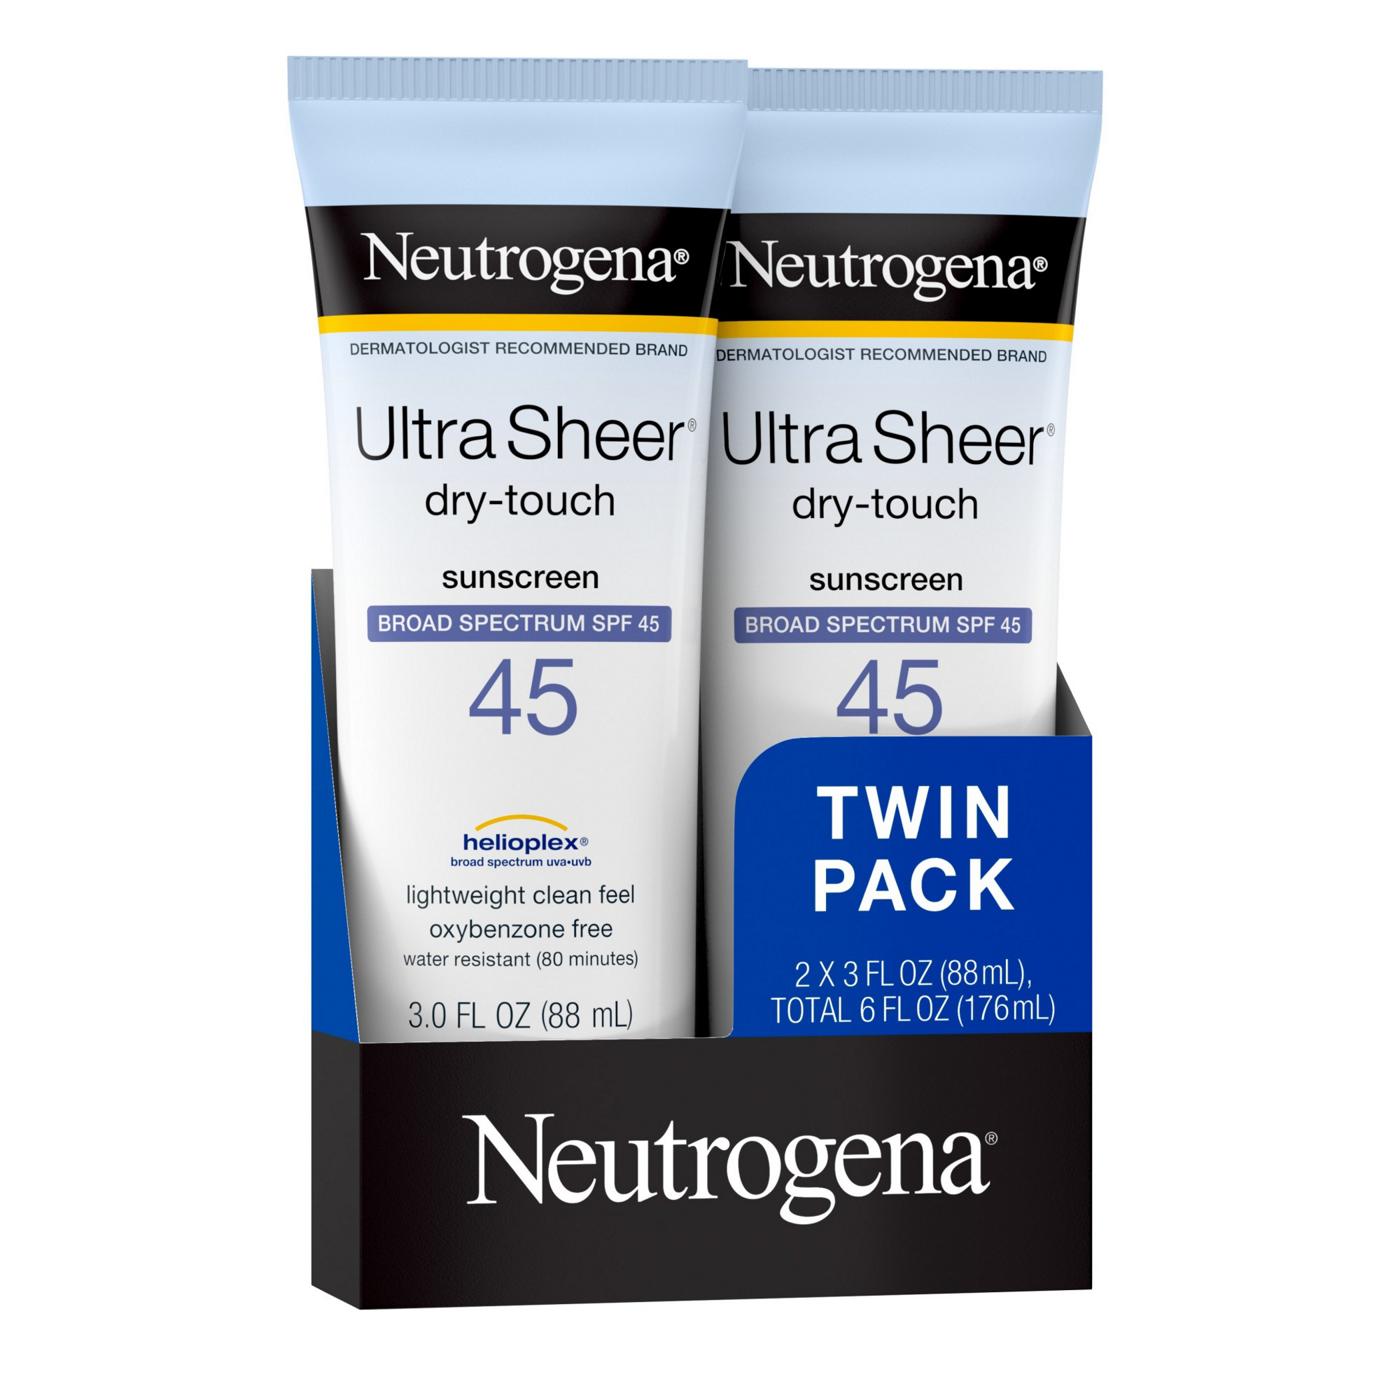 Neutrogena Ultra Sheer Dry-Touch Sunscreen Twin Pack - SPF 45; image 3 of 8